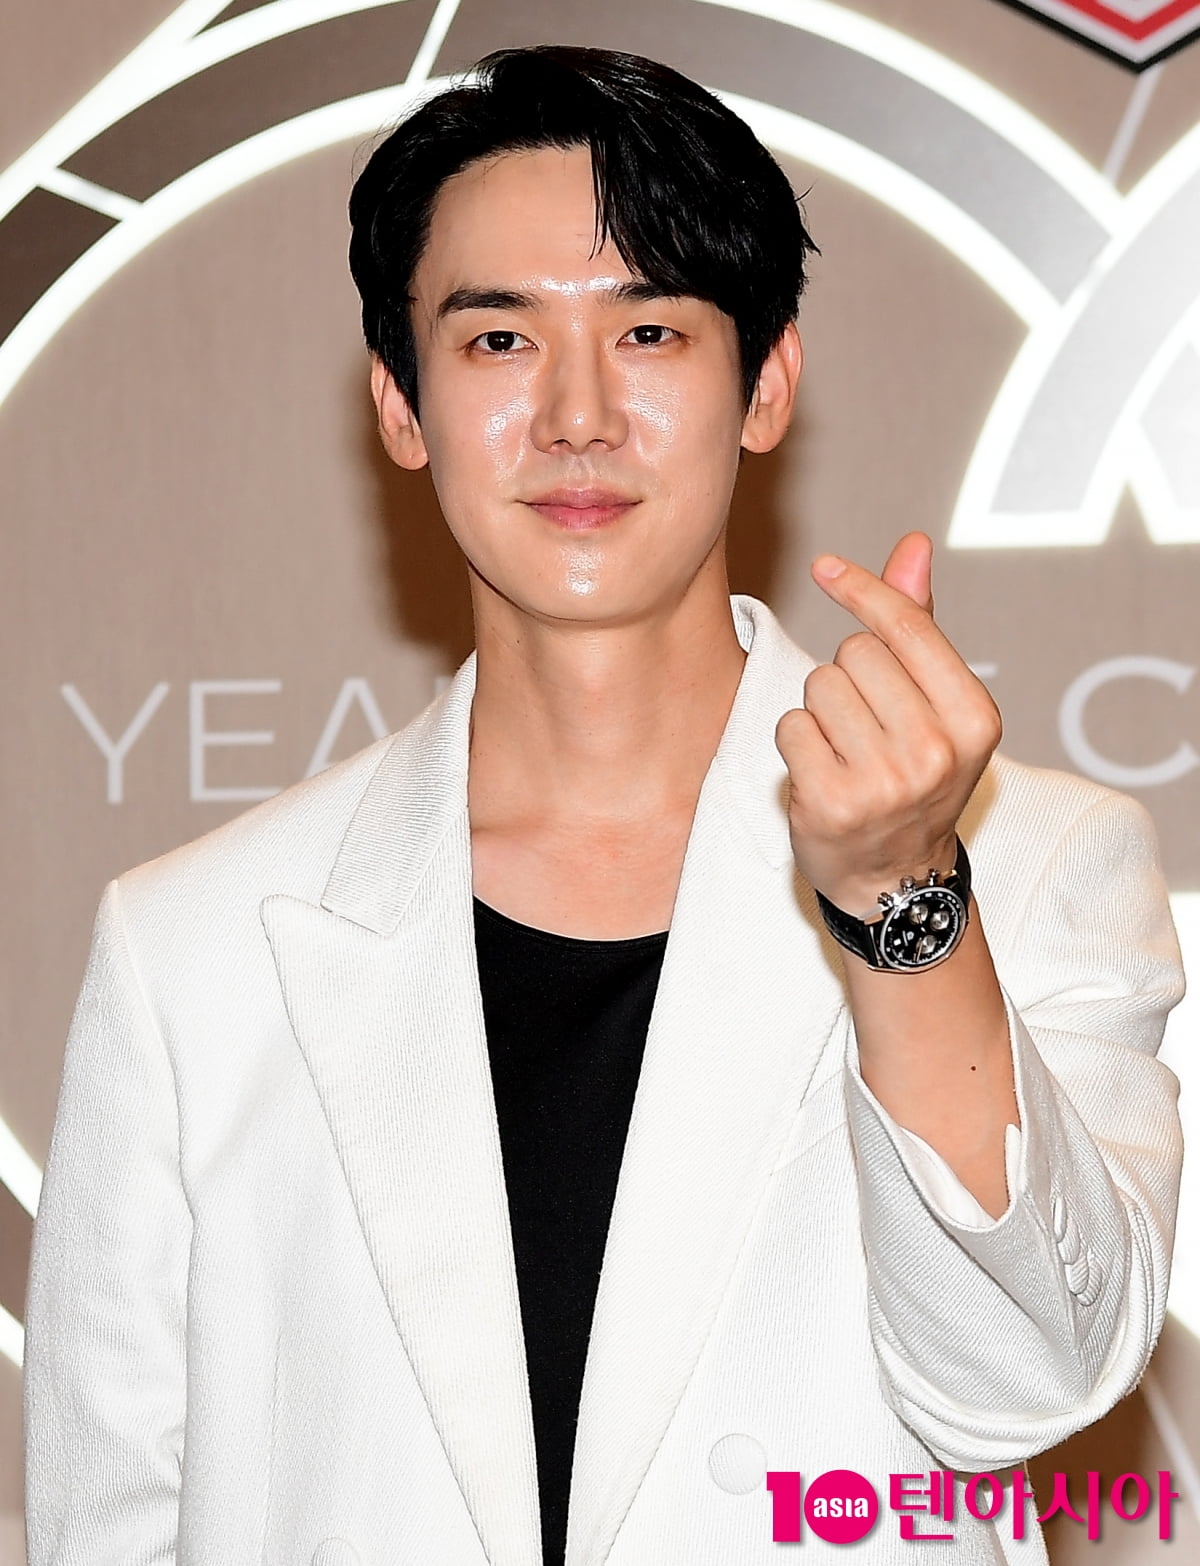 Yoo Yeon-seok "Look for a lot of psychopath interviews and documentaries"